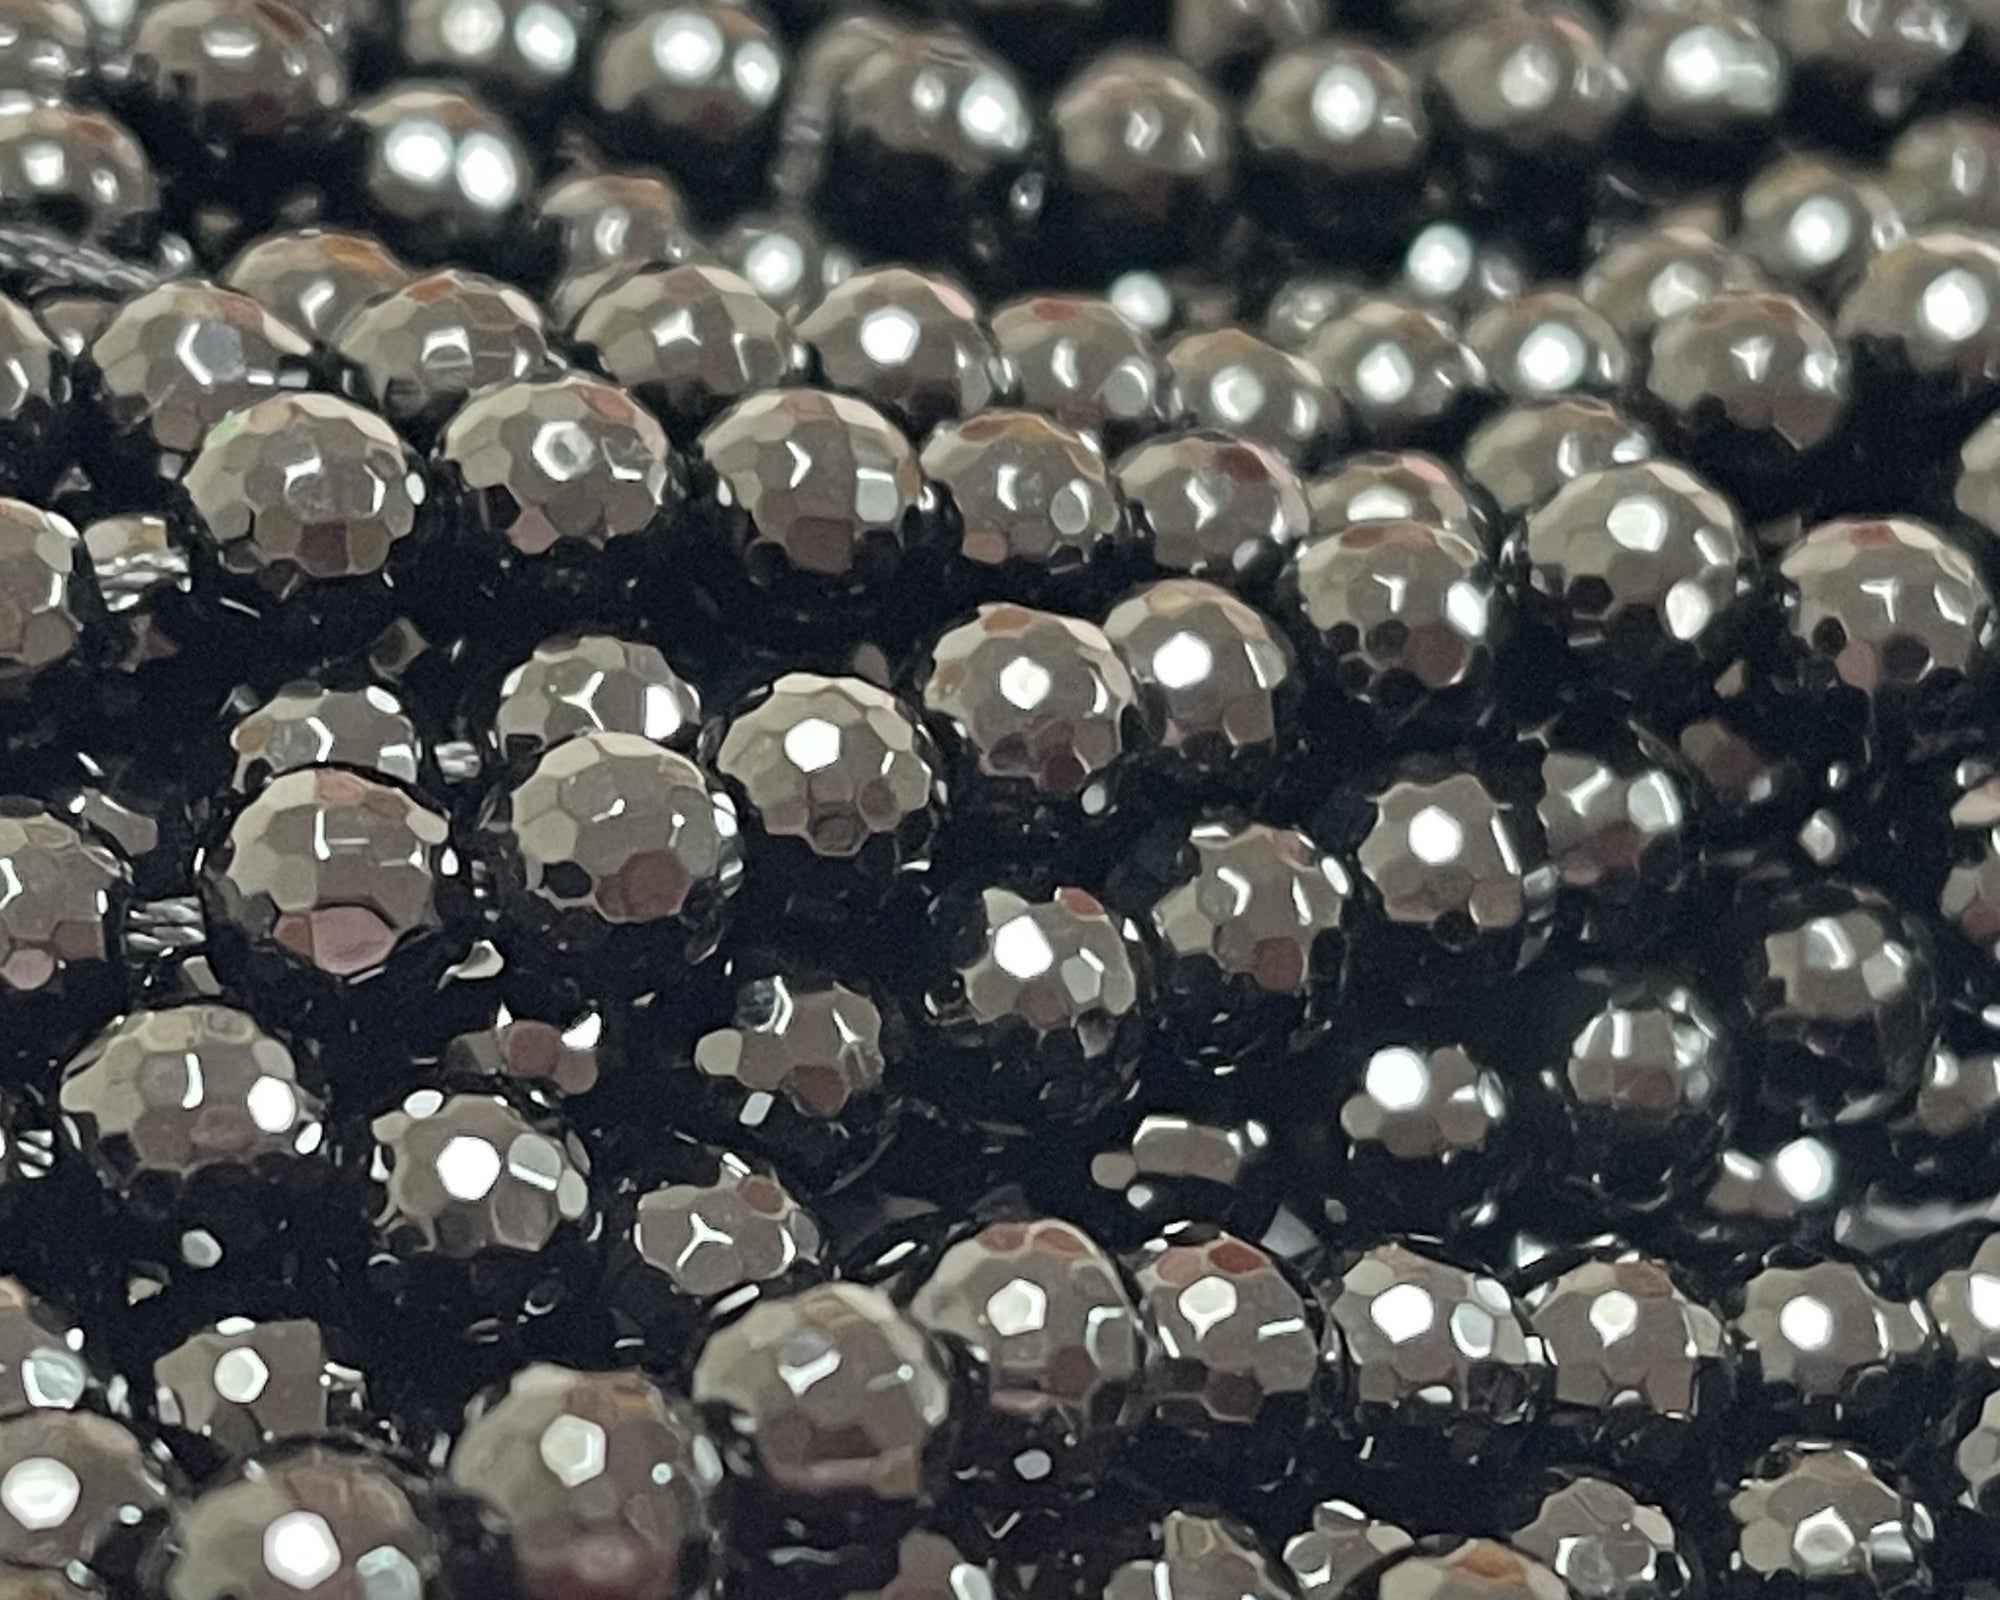 Black Onyx 6mm round micro faceted gemstone beads 15" strand